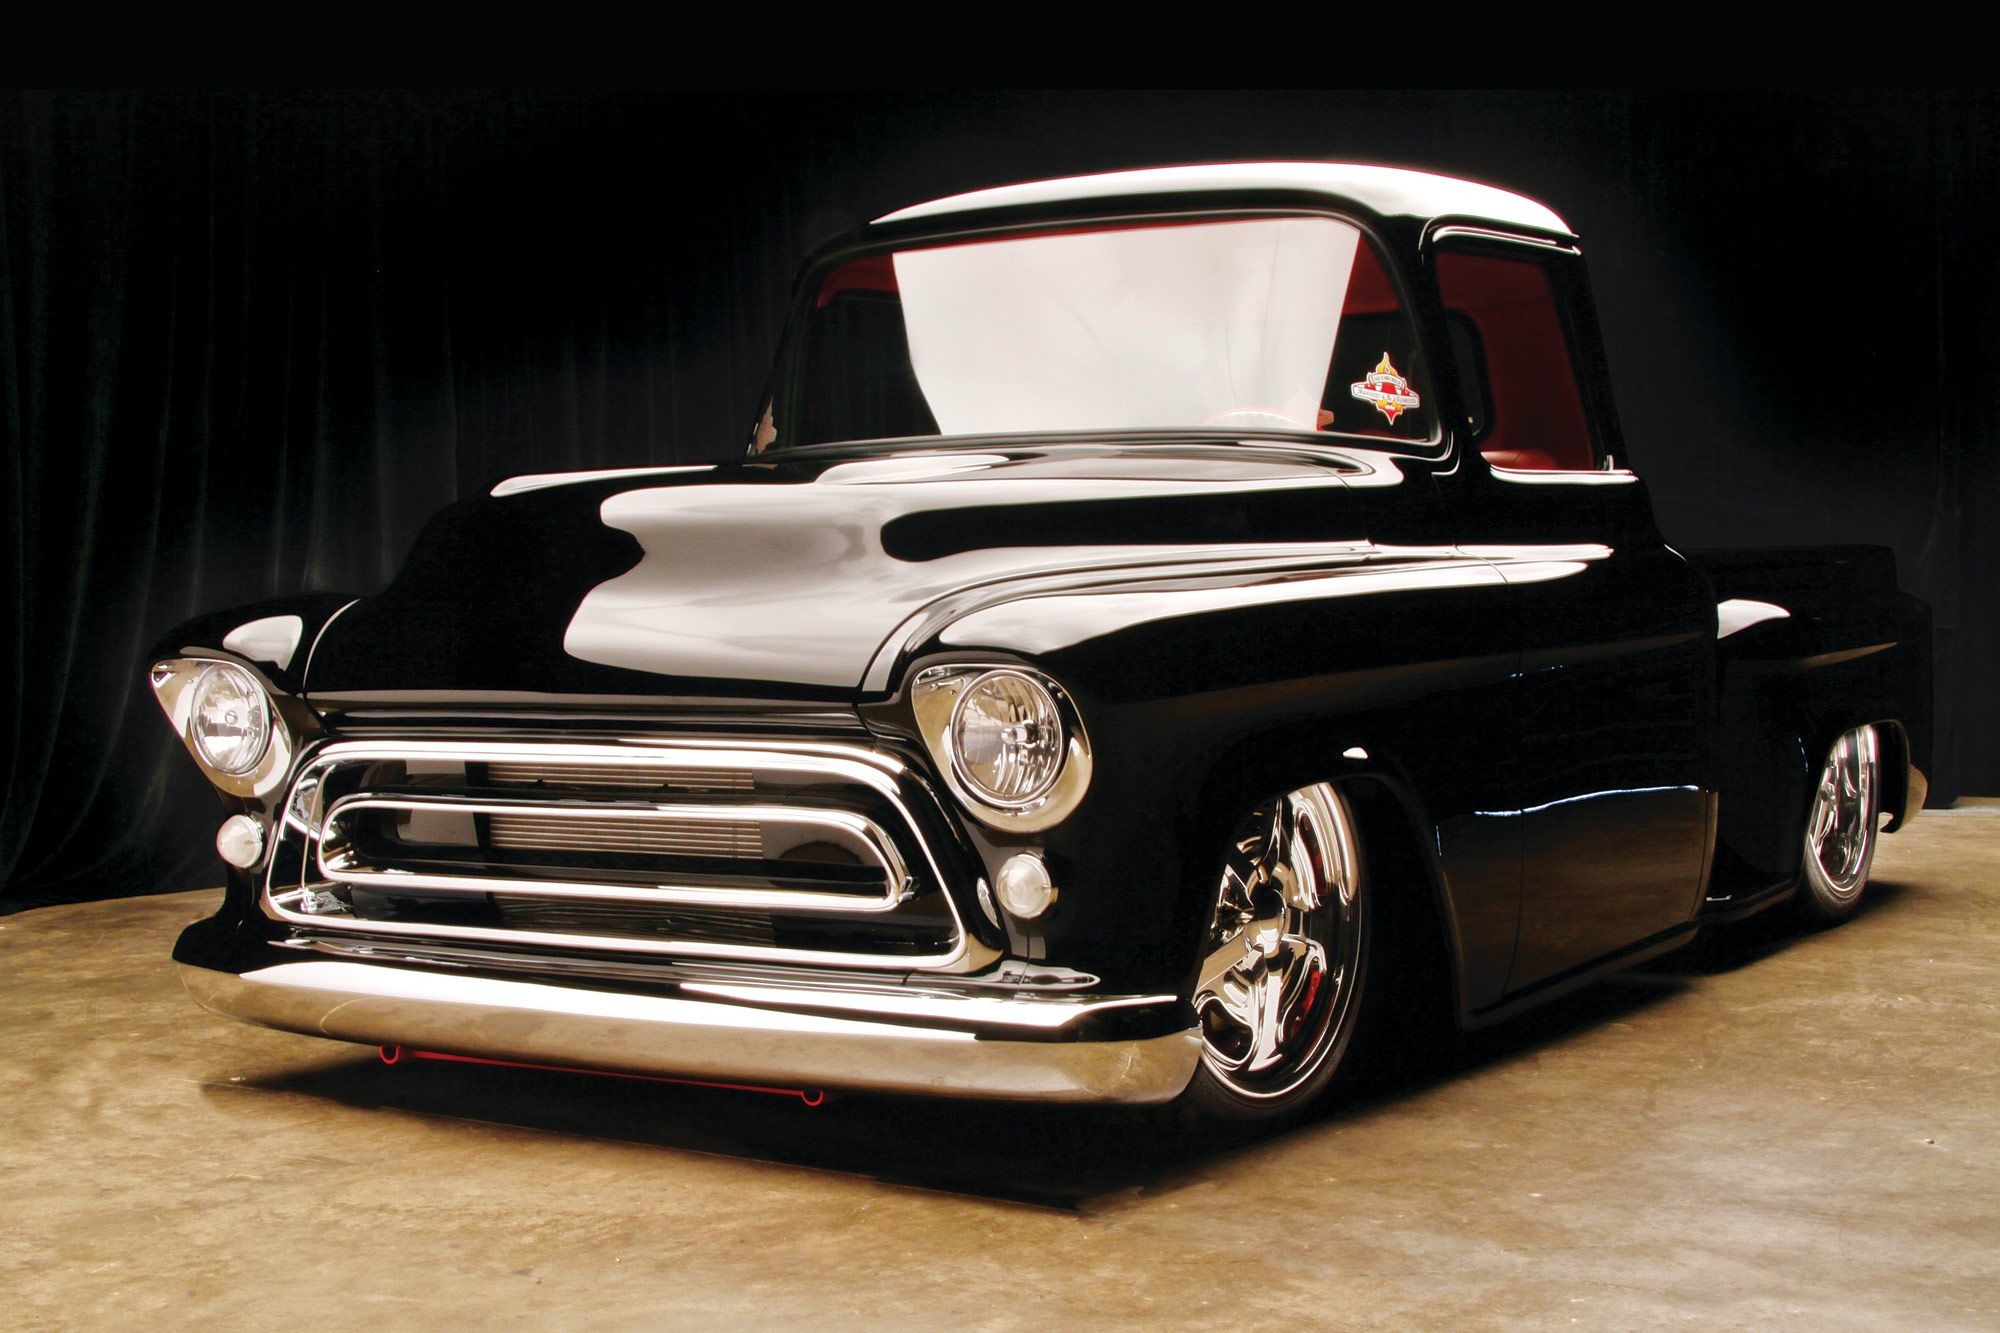 2000x1333 Filename: Images-HD-Chevy-Wallpapers.jpg